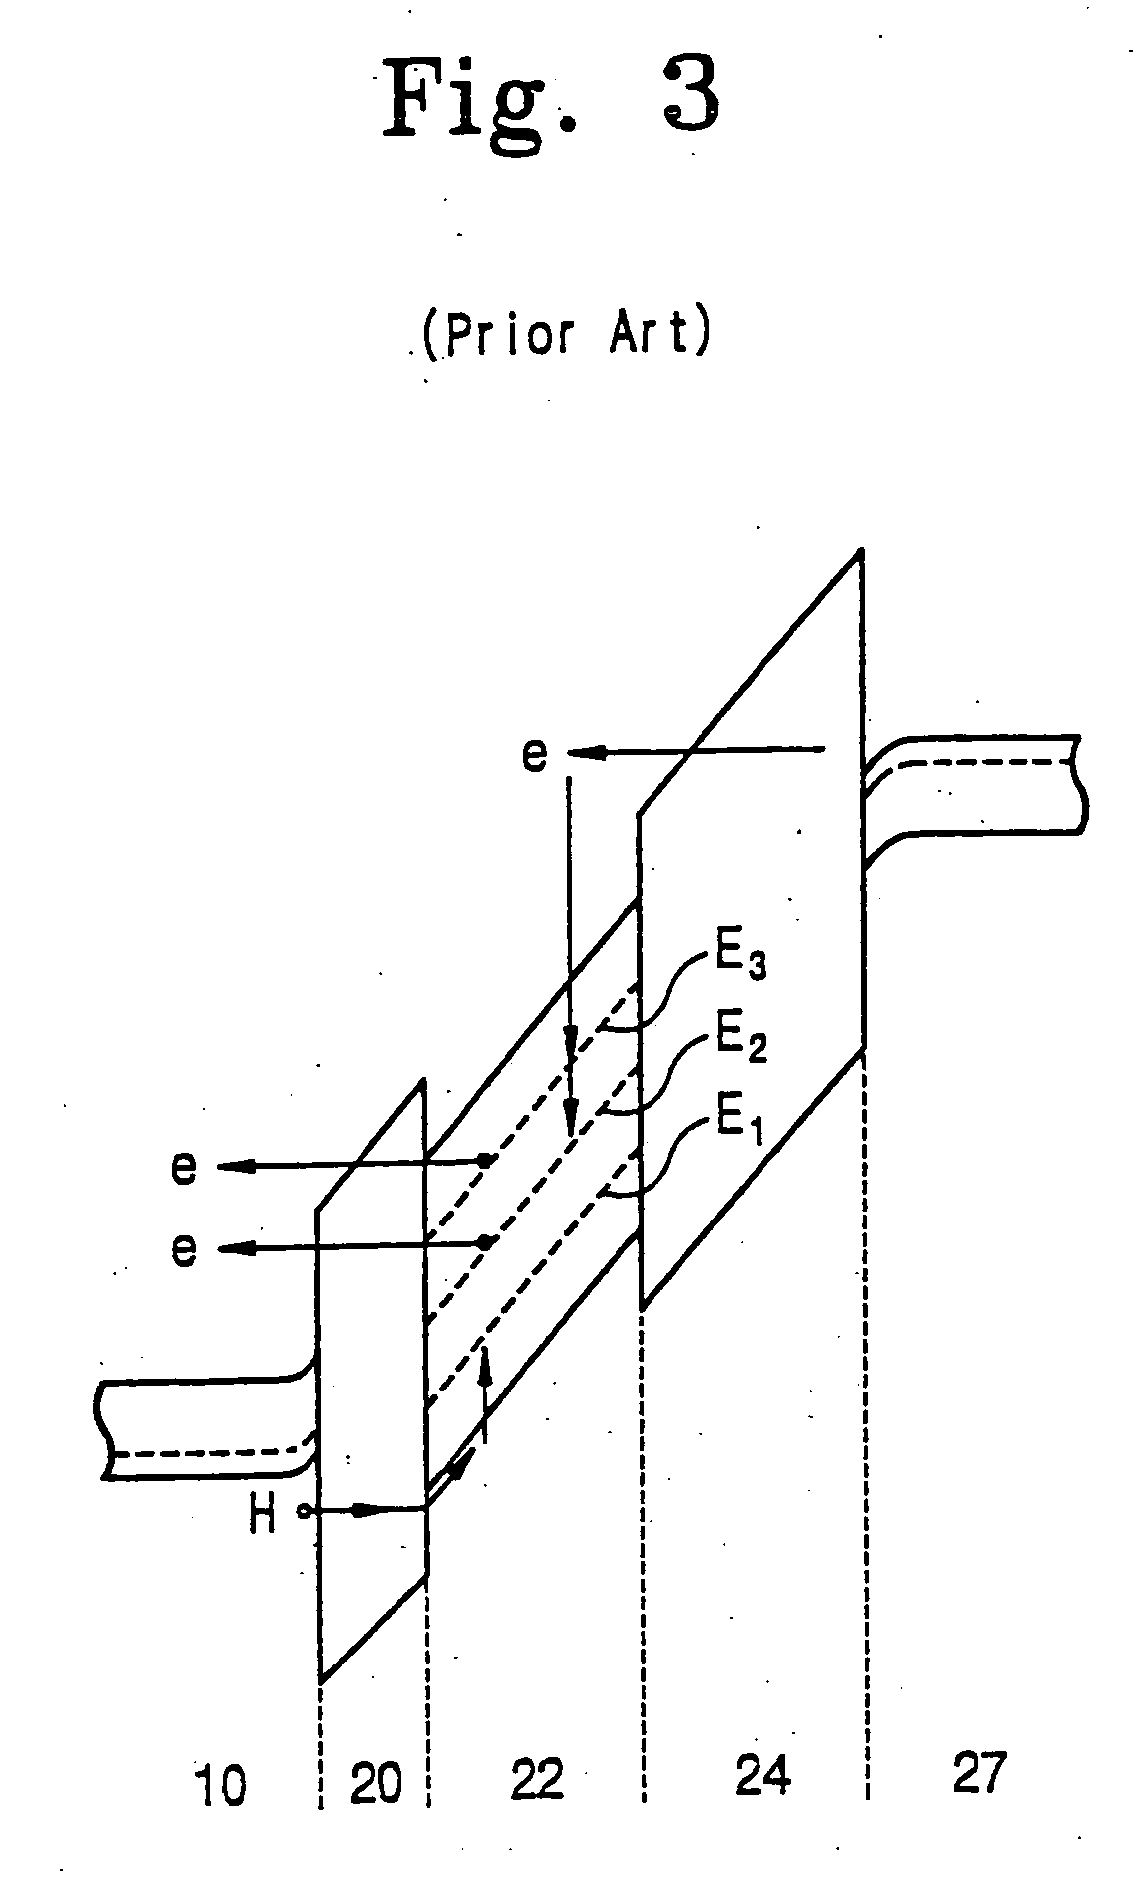 Non-volatile memory devices and methods of operating the same